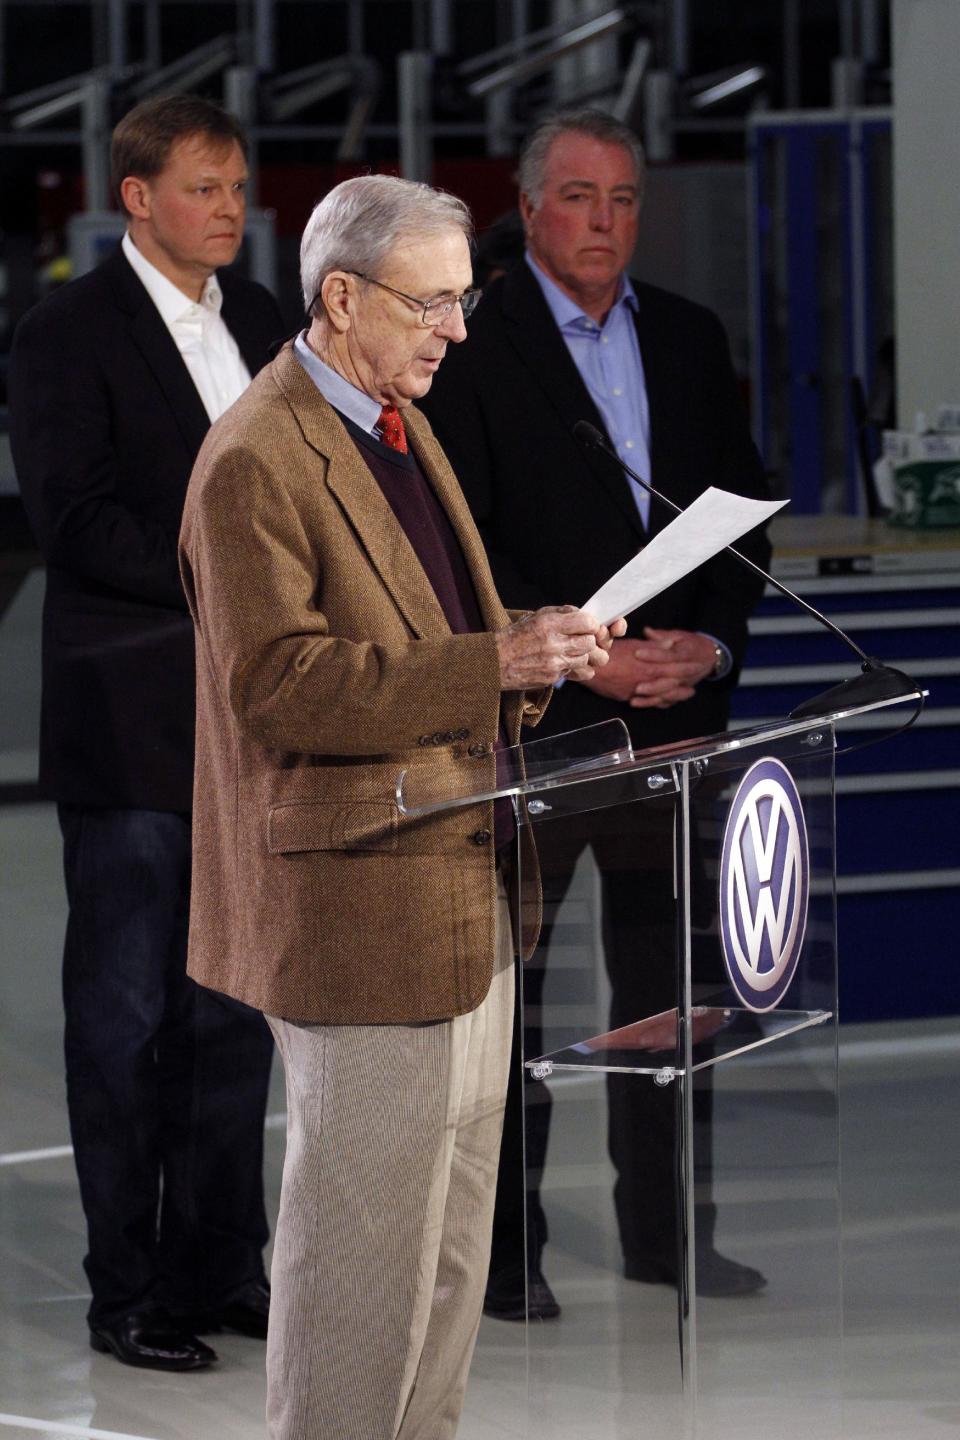 Retired circuit judge Sam Payne, foreground, announces that Volkswagen employees voted to deny representation by the United Auto Workers union as Frank Fischer, Chairman and CEO of the Volkswagen Group of America, left, and Gary Casteel, UAW Region 8 Director, look on from behind, concluding a three day election which ended this evening Friday, Feb. 14, 2014, in Chattanooga, Tenn. (AP Photo/Chattanooga Times Free Press, Dan Henry) THE DAILY CITIZEN OUT; NOOGA.COM OUT; CLEVELAND DAILY BANNER OUT; LOCAL INTERNET OUT